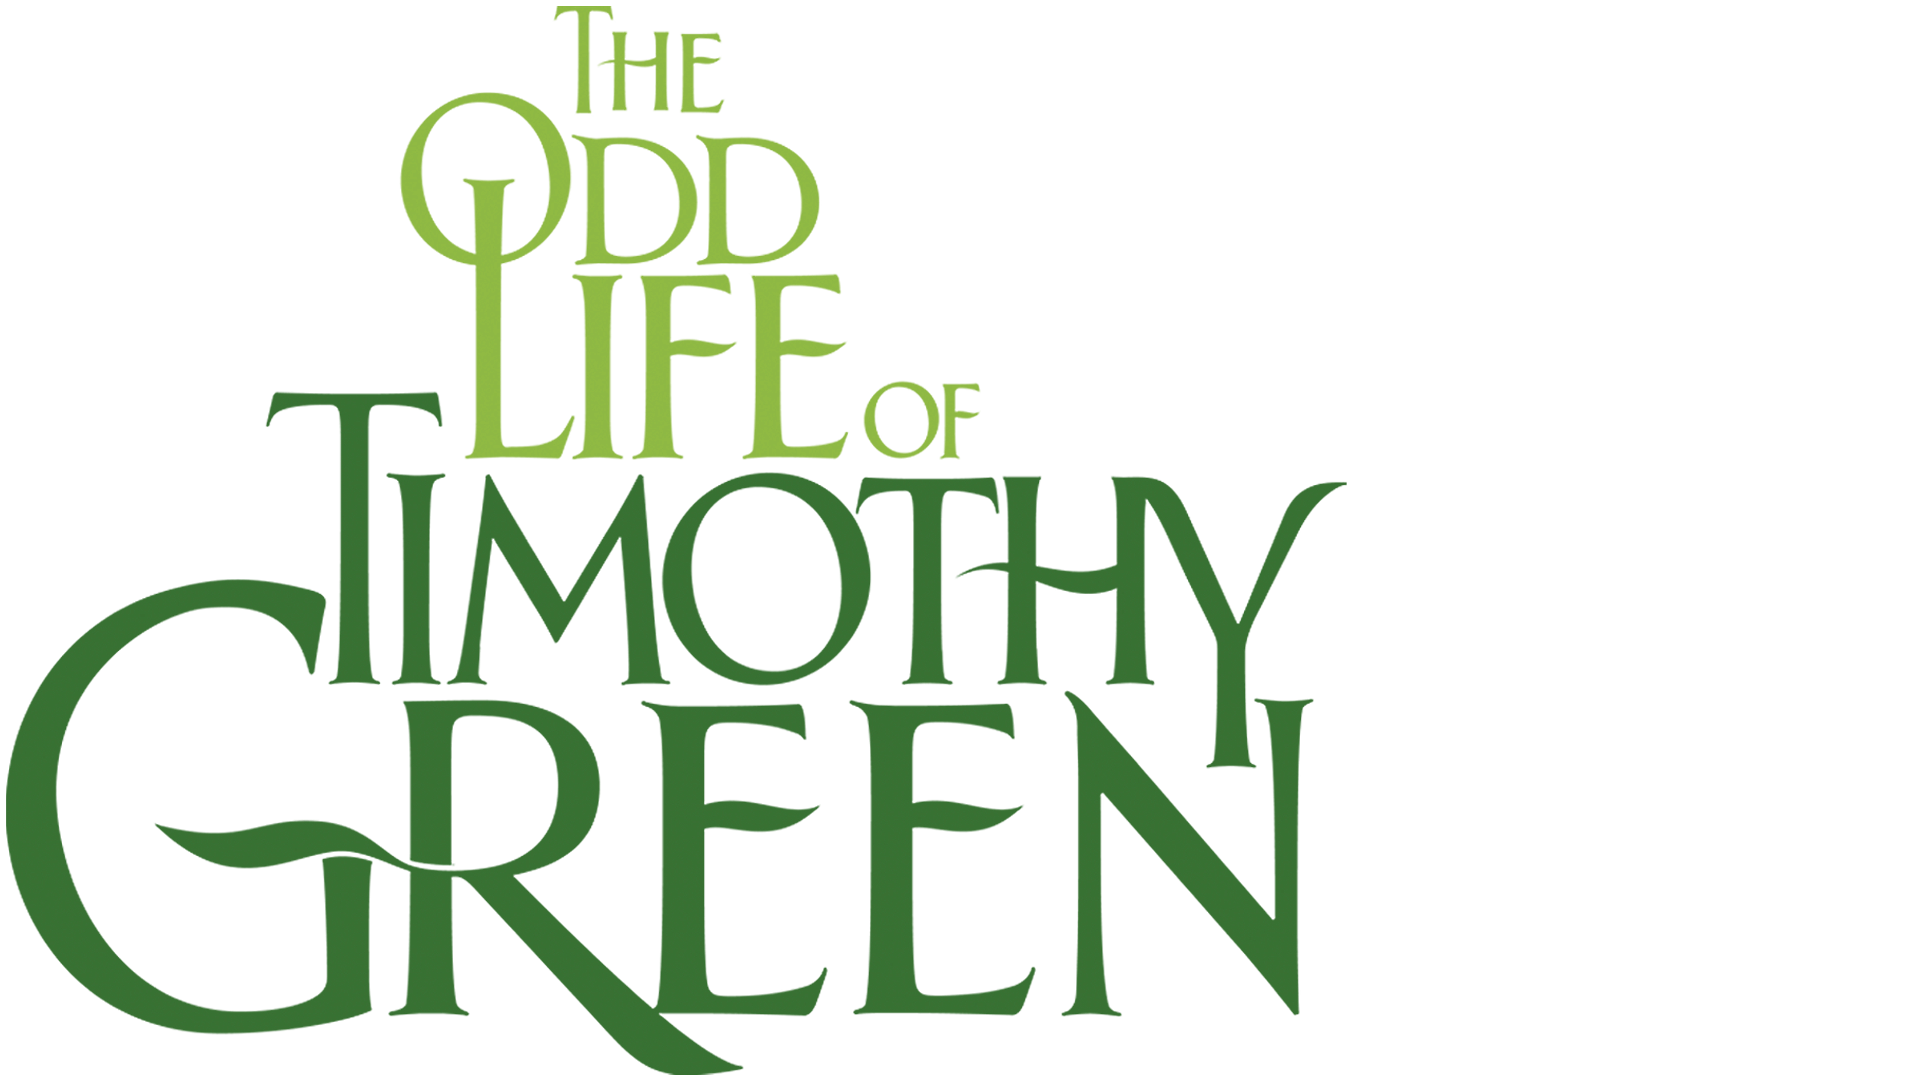 The odd life of timothy green